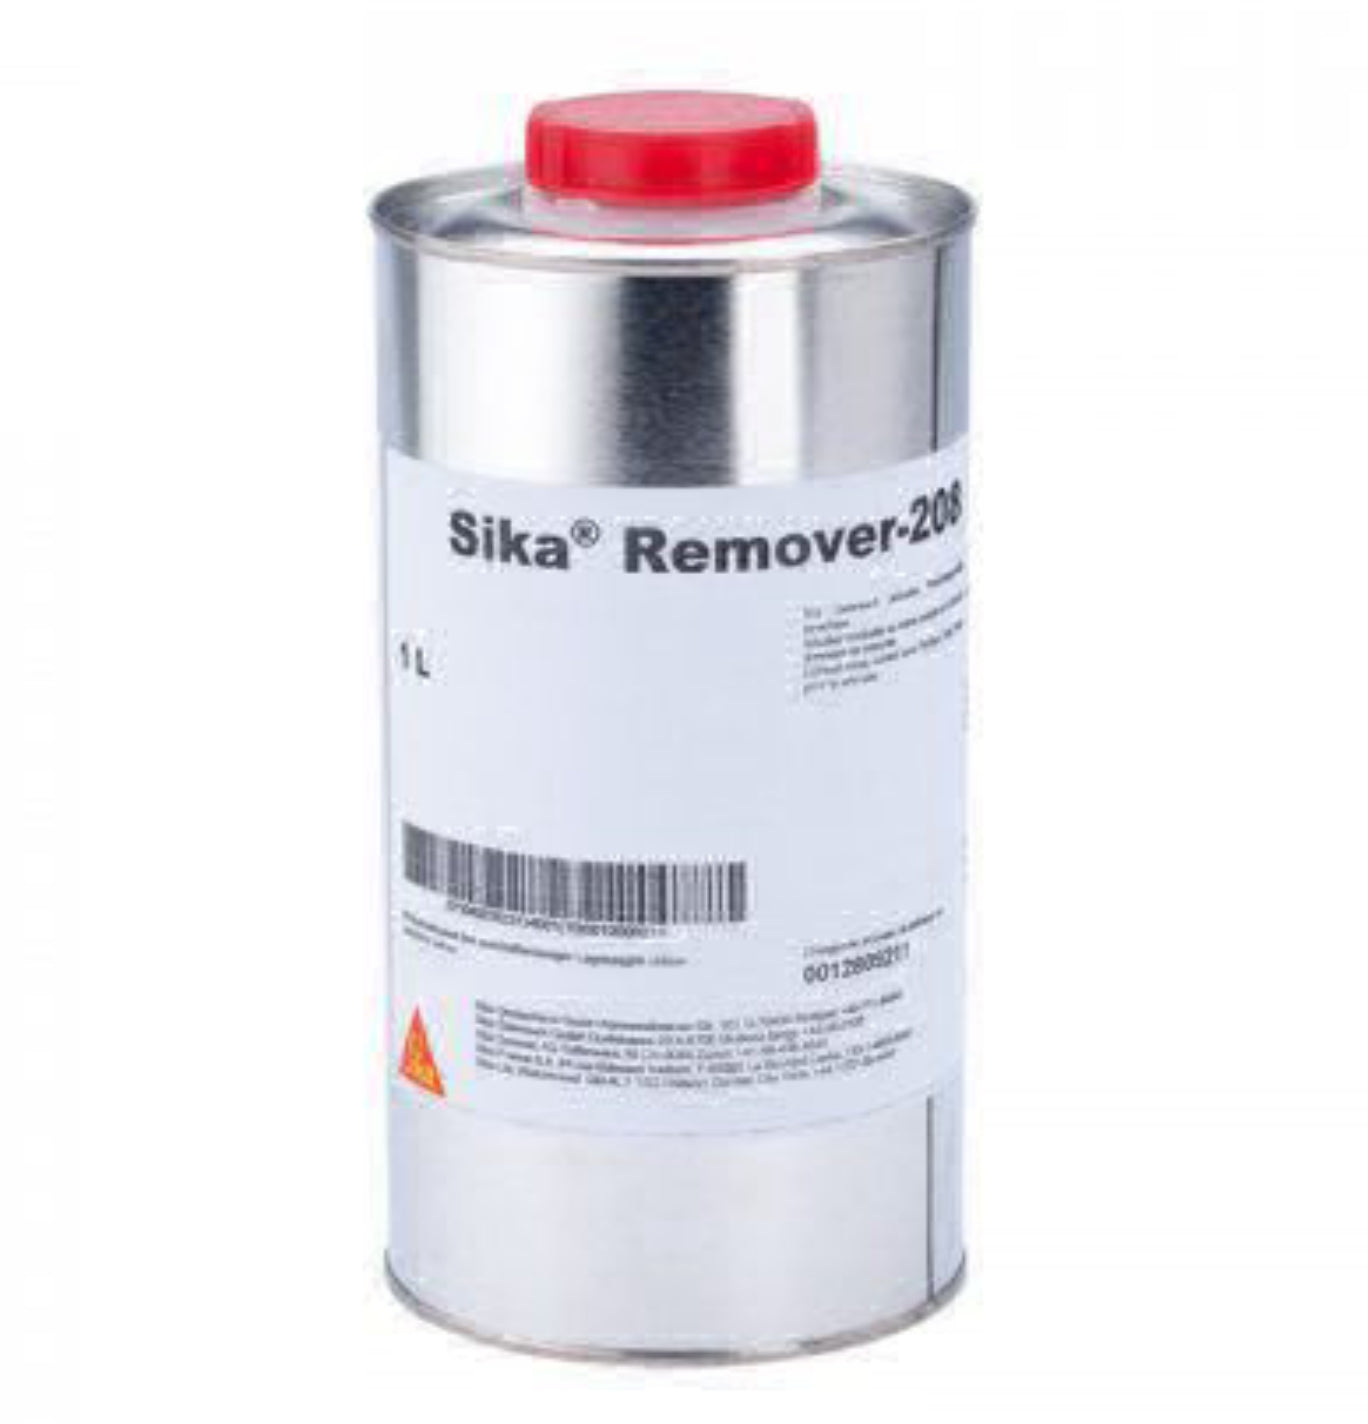 Sika Remover 208 | 1 Litre | Cleaning & Pre-Treatment Agent Image